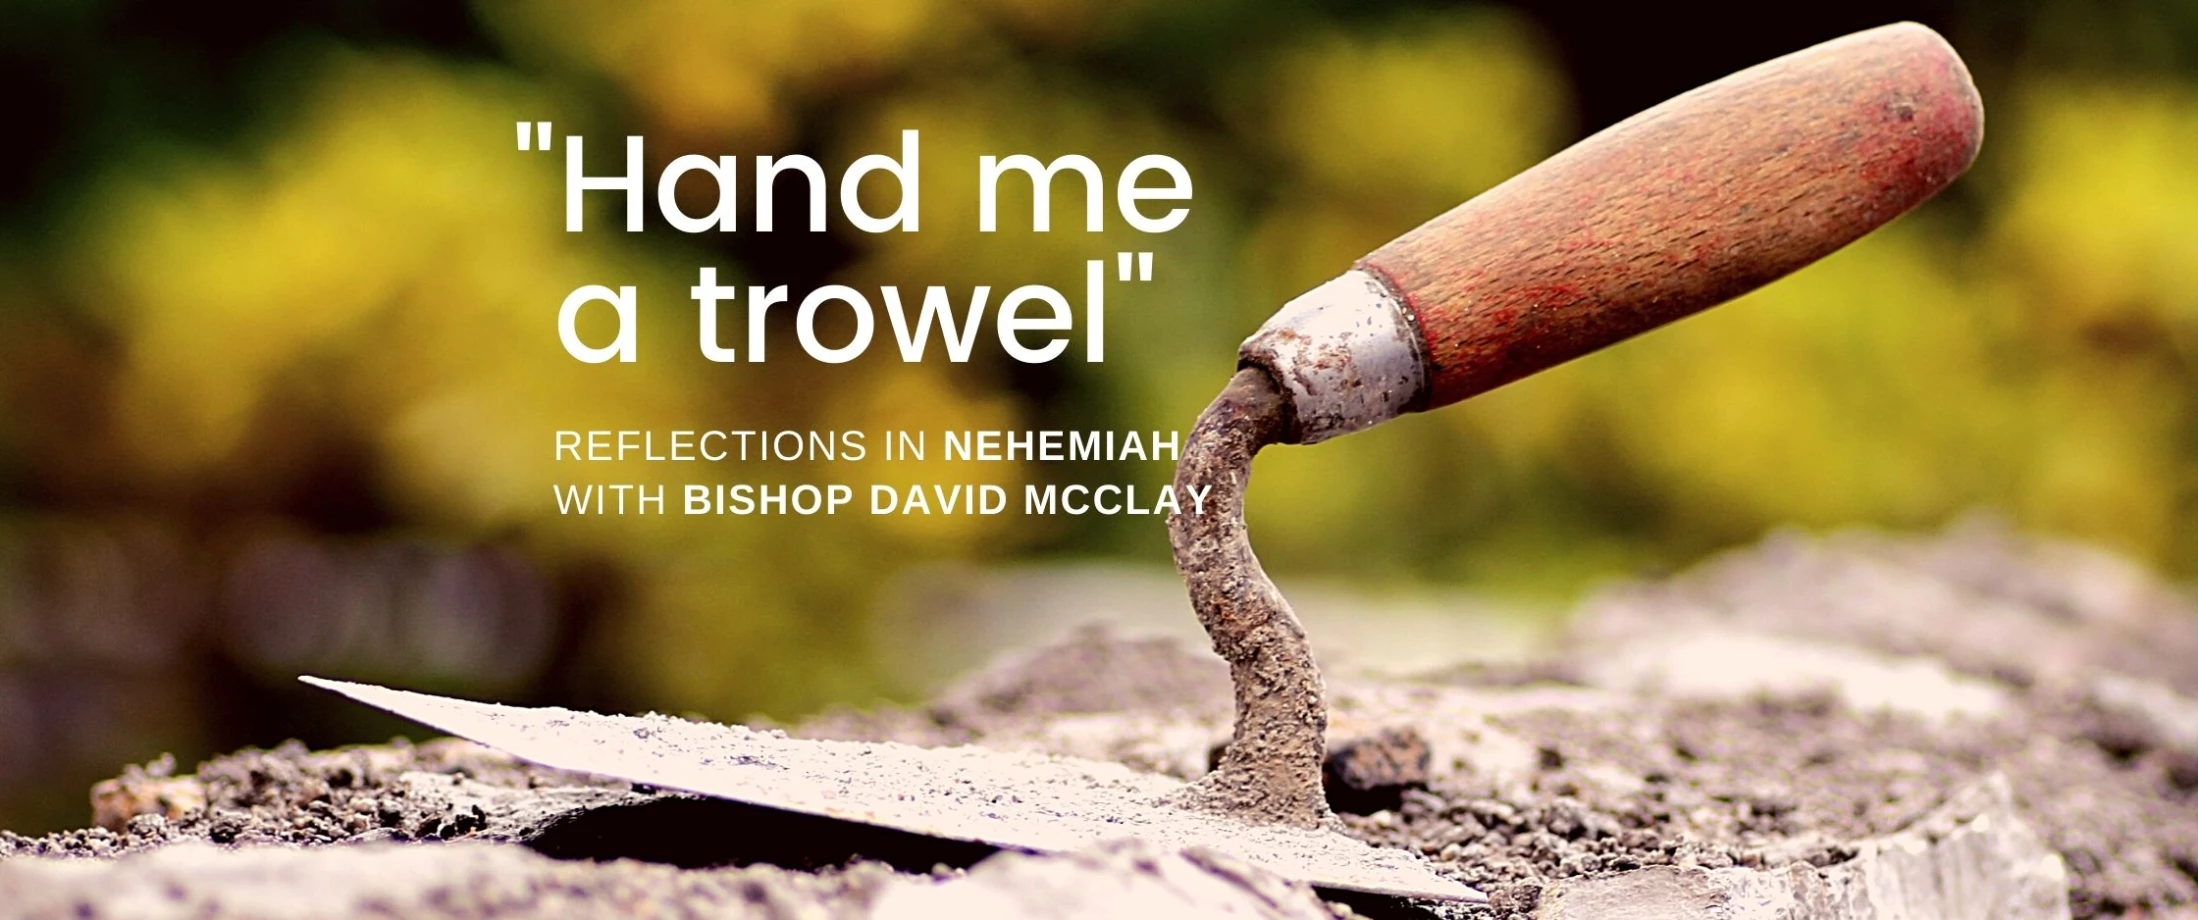 Reflections in Nehemiah for Lent Day 25